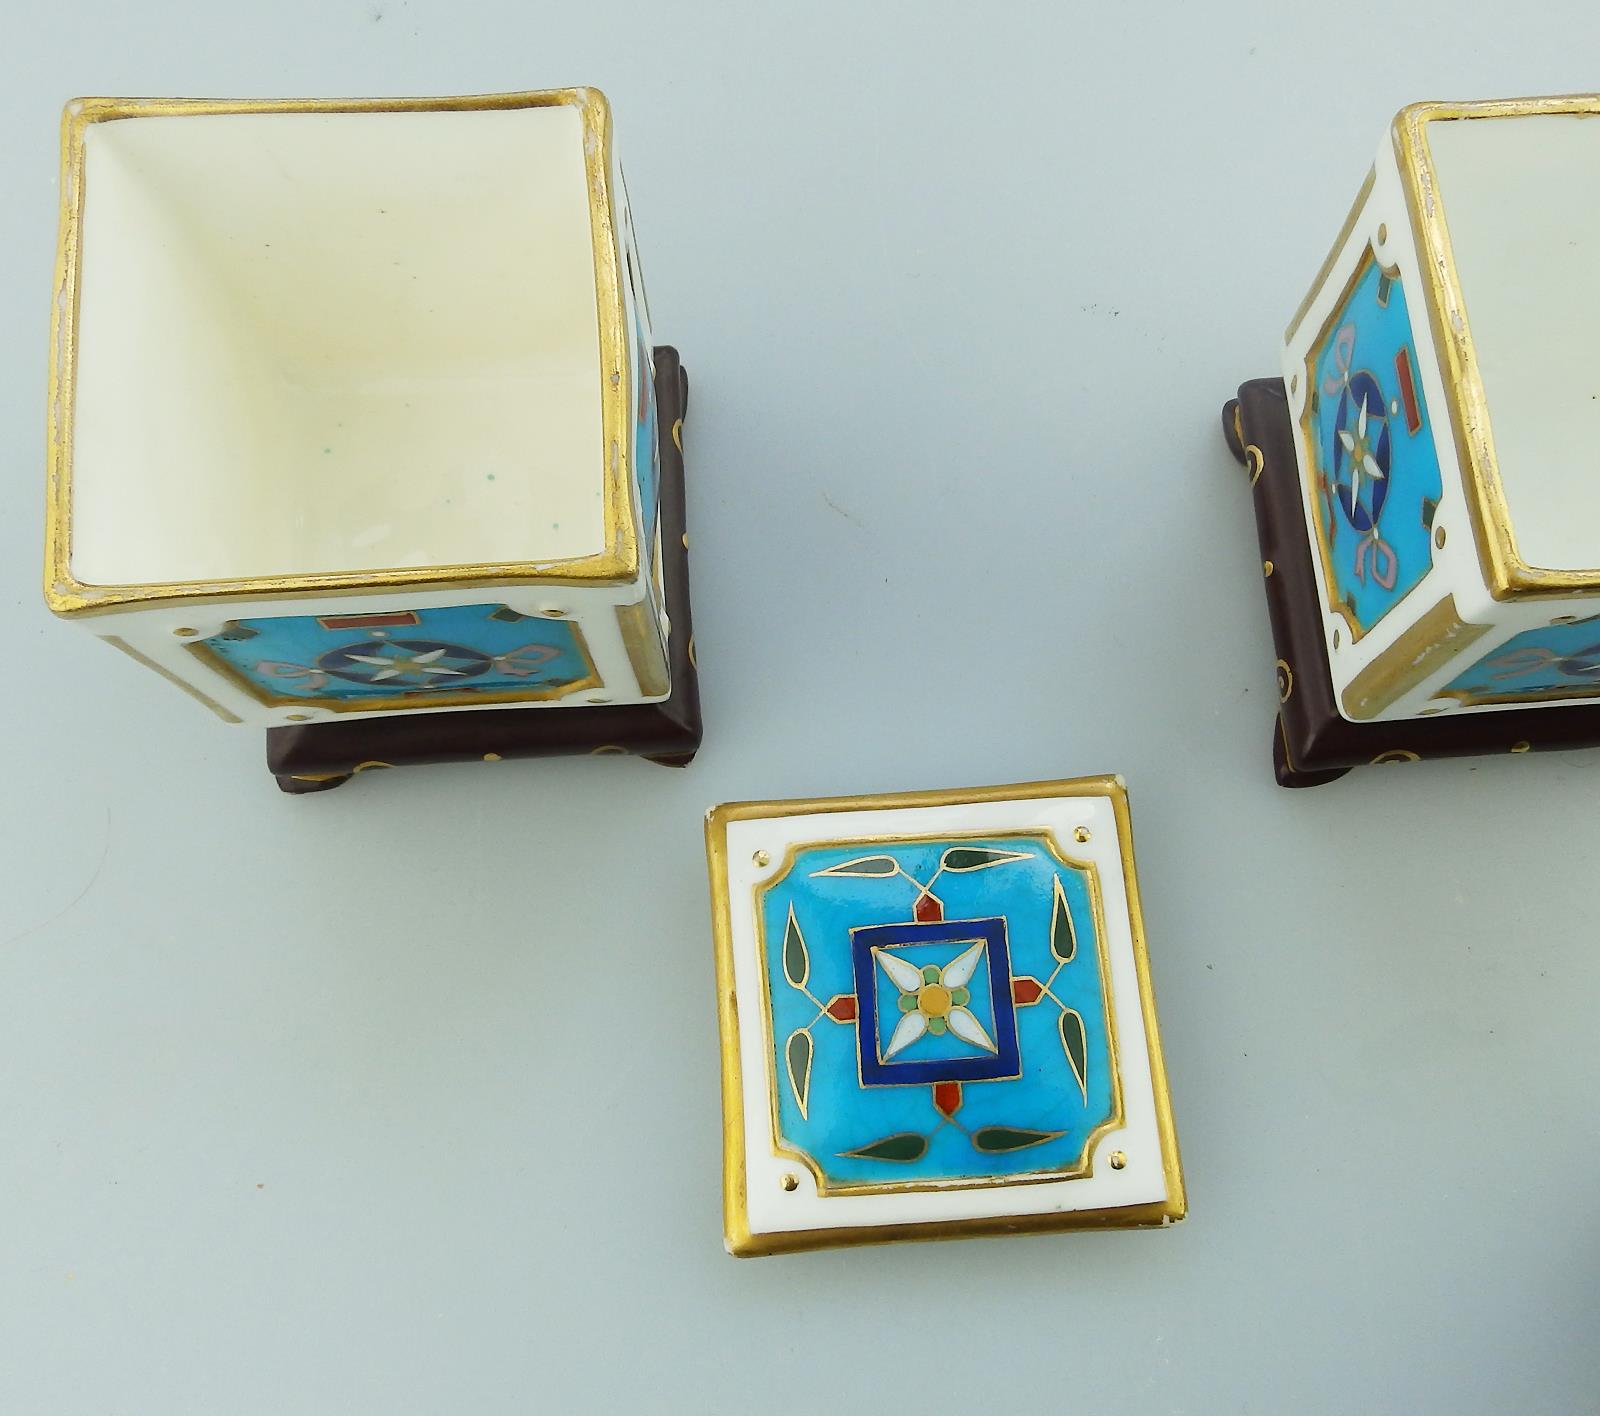 A pair of Minton porcelain miniature Boxes designed by Christopher Dresser 19thC - Image 6 of 9